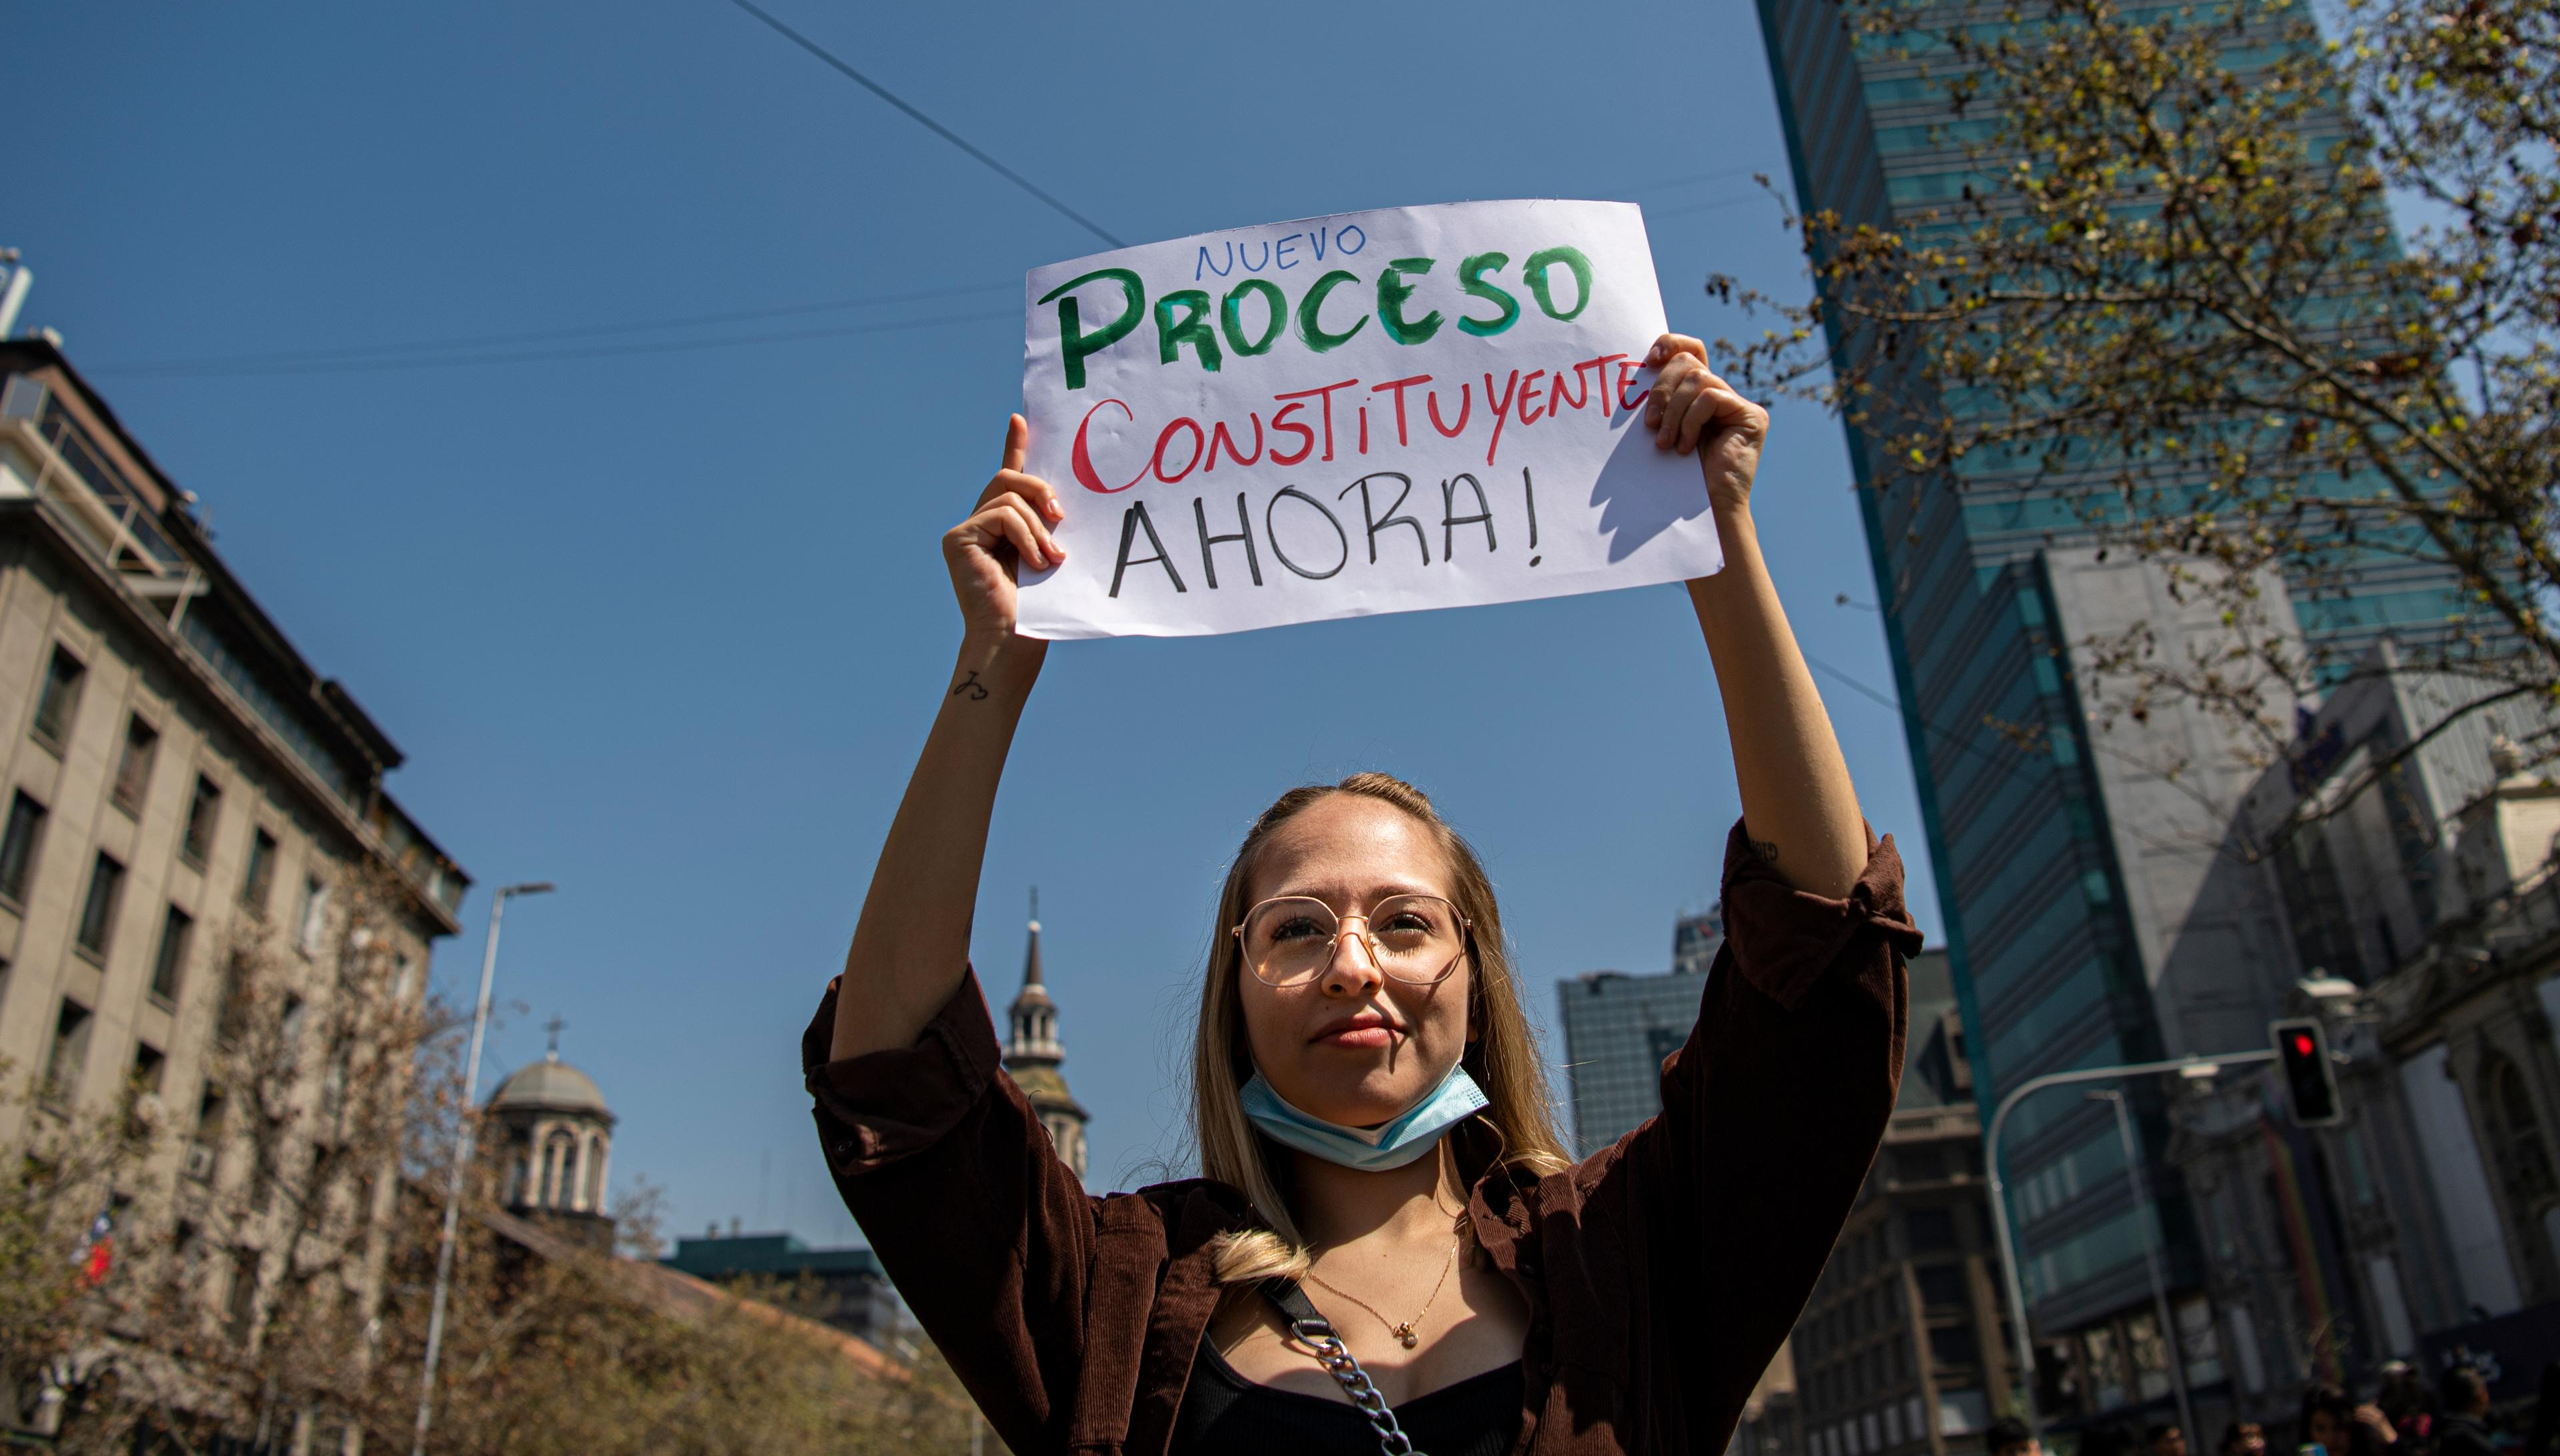 A student takes part in a demonstration to demand a new Constituent Assembly process, in the surroundings of La Moneda Presidential Palace in Santiago, on September 14, 2022. - Earlier this month, Chileans overwhelmingly rejected a draft constitution that would have replaced the constitution adopted during Augusto Pinochet's dictatorship. (Photo by Martin BERNETTI / AFP)